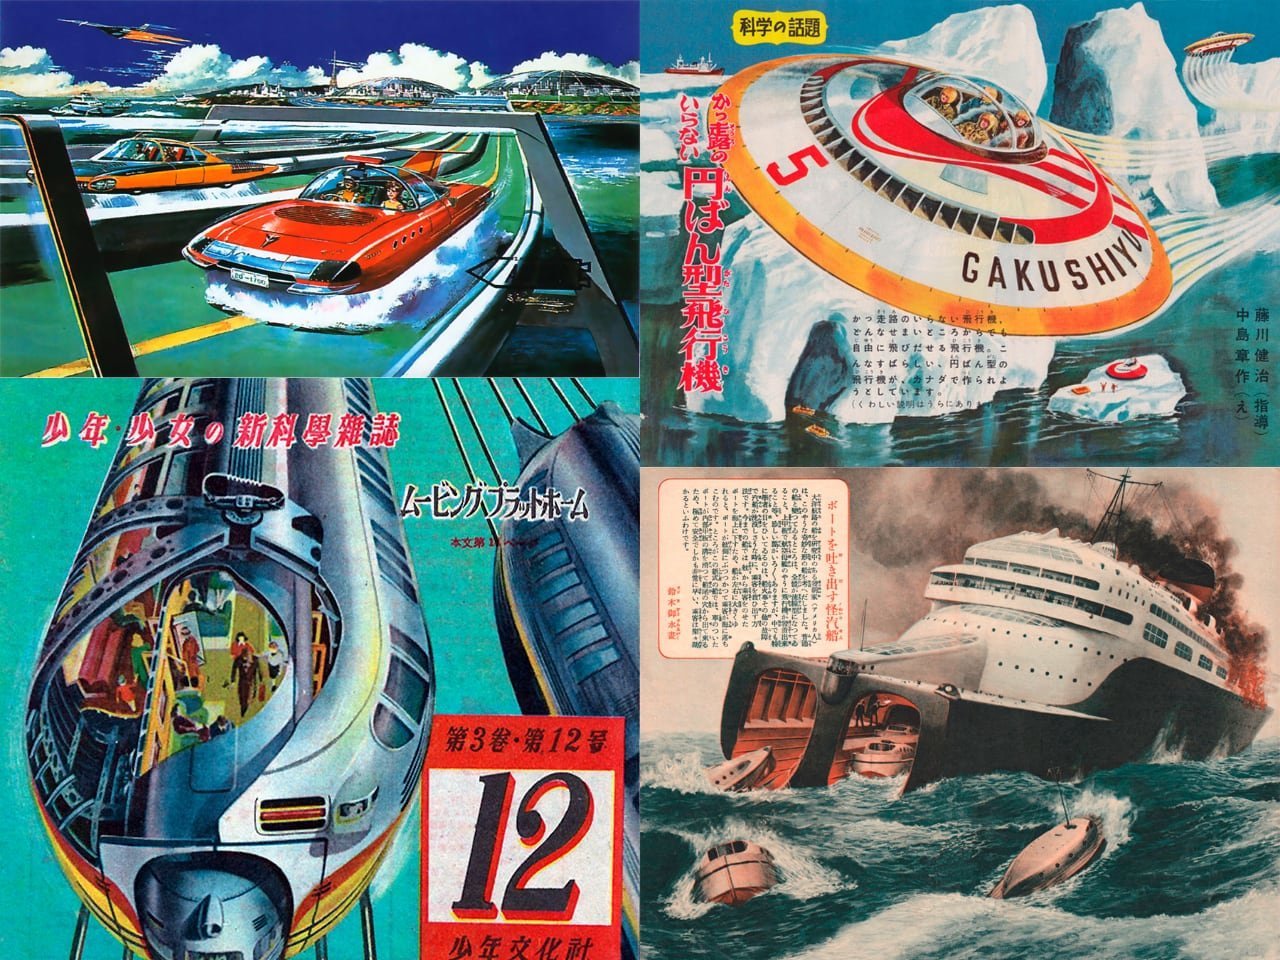 Retrofuture Revelations from Japan: A Journey Through Time and Imagination